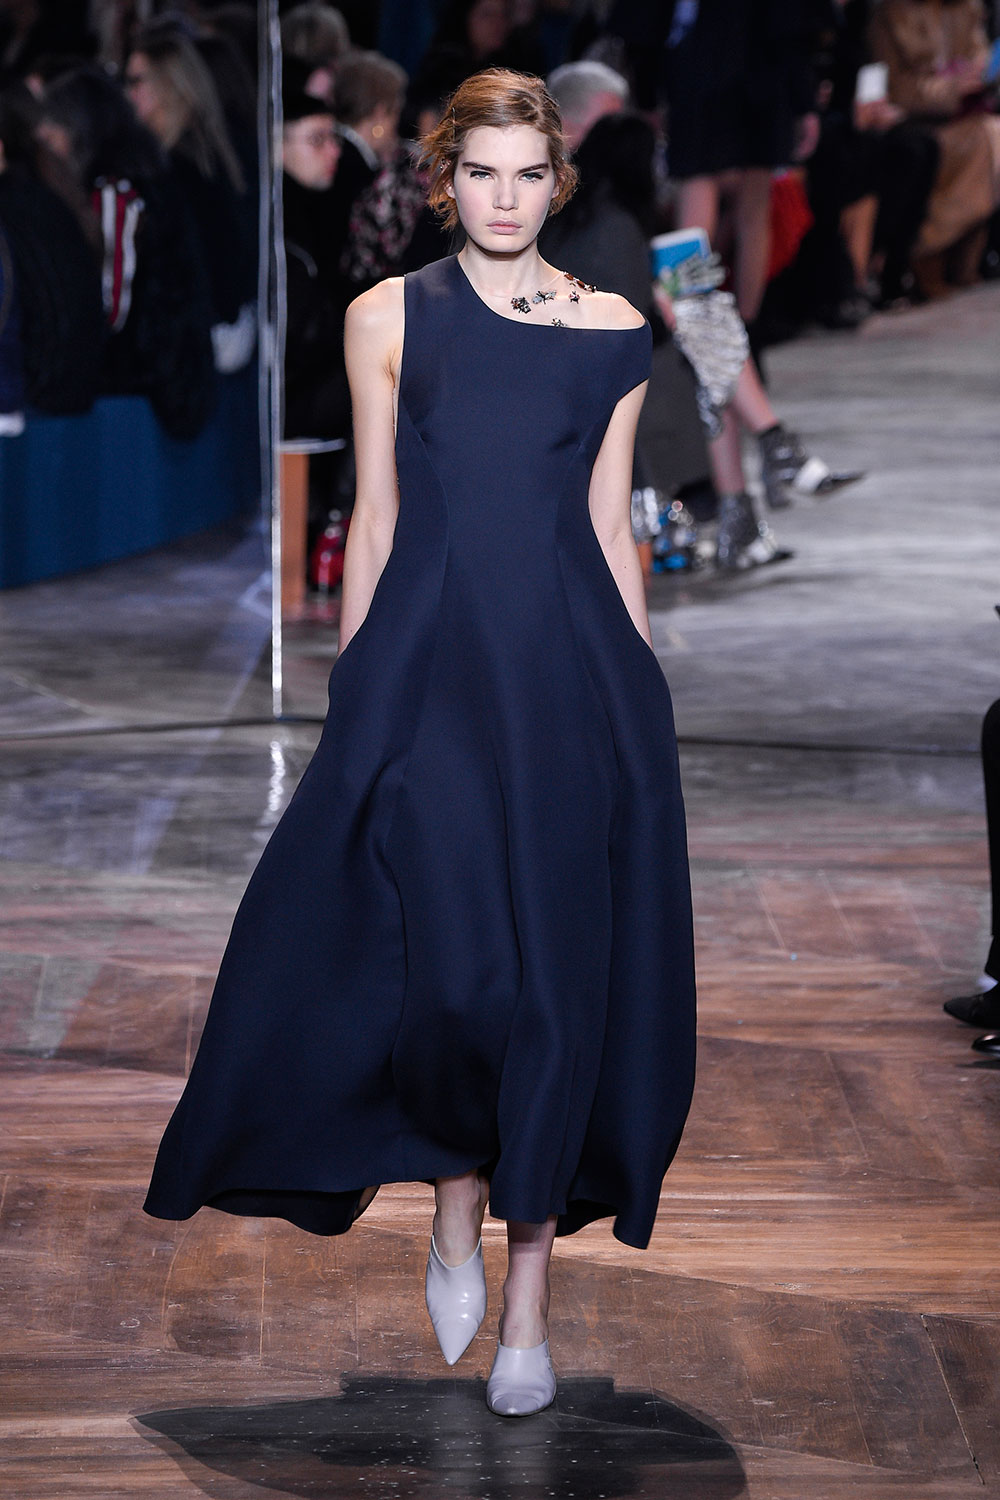 Christian Dior SS16 navy blue gown